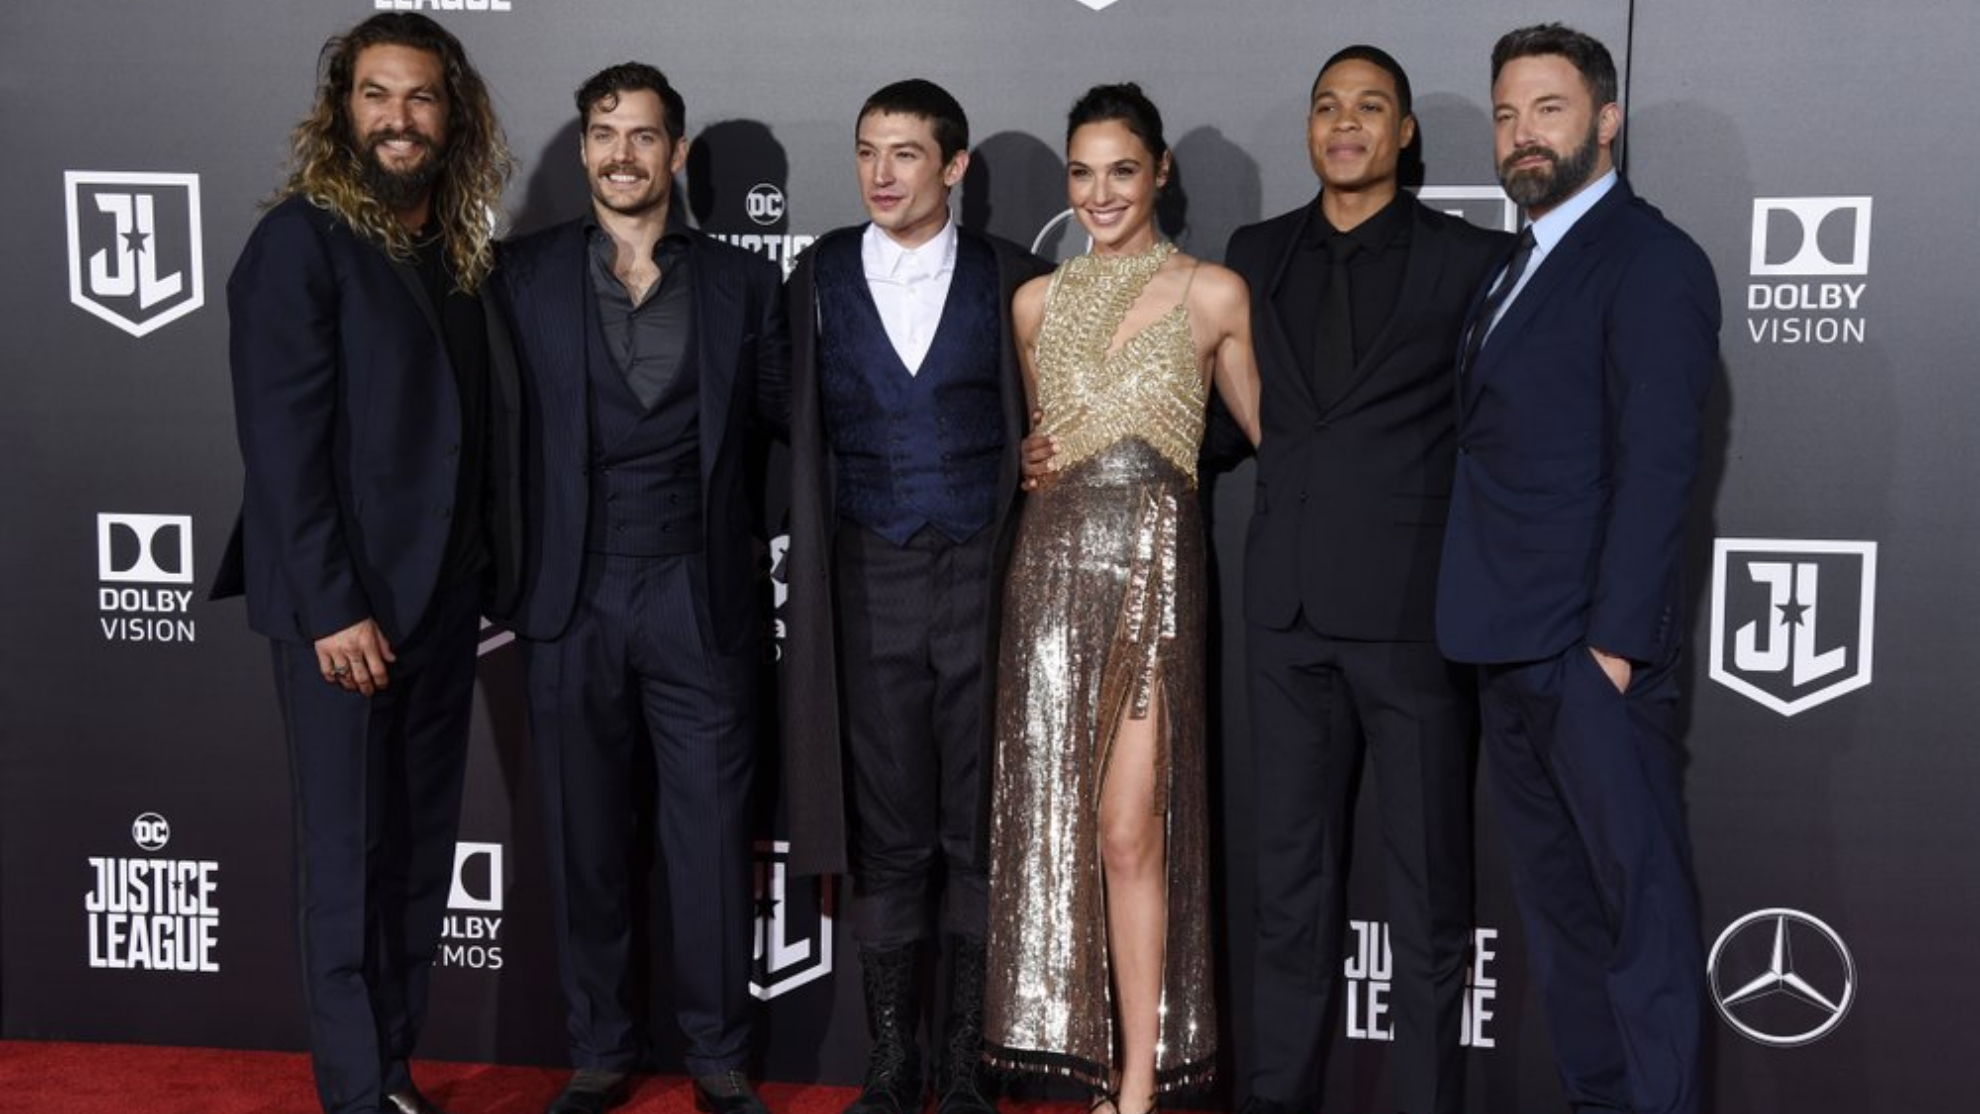 The cast of "Justice League," pose at the premiere of the film in Los Angeles.